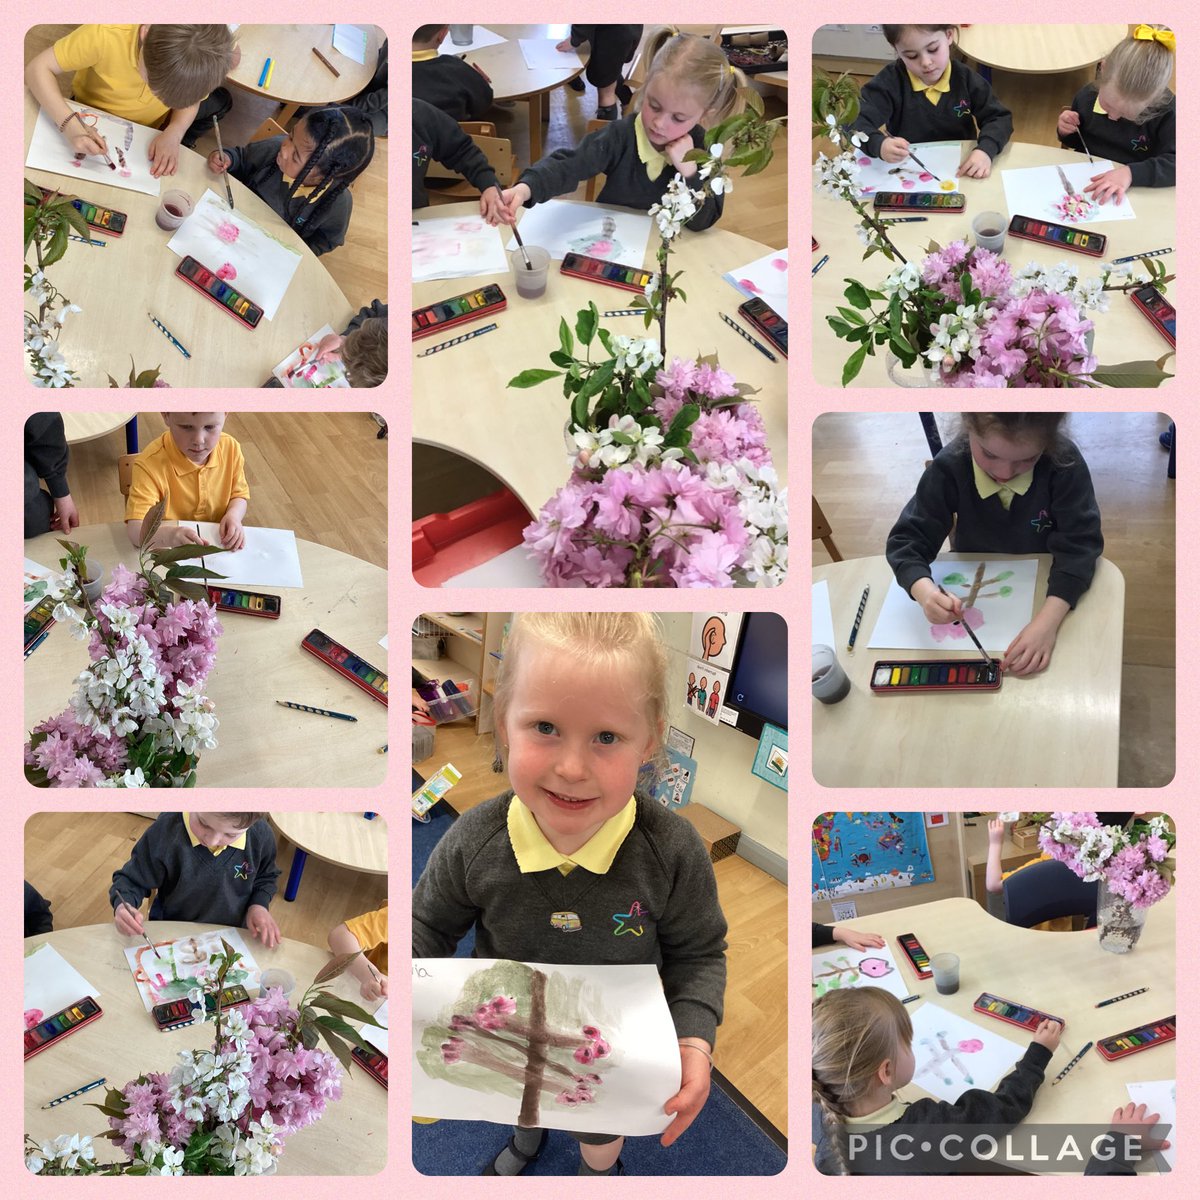 Reception have been looking at the changes in the outdoor environment and noticed that lots of the trees have beautiful blossom on them. The children then had a go at painting the blossom using water colours. #TSPArt #Enjoy 🌸